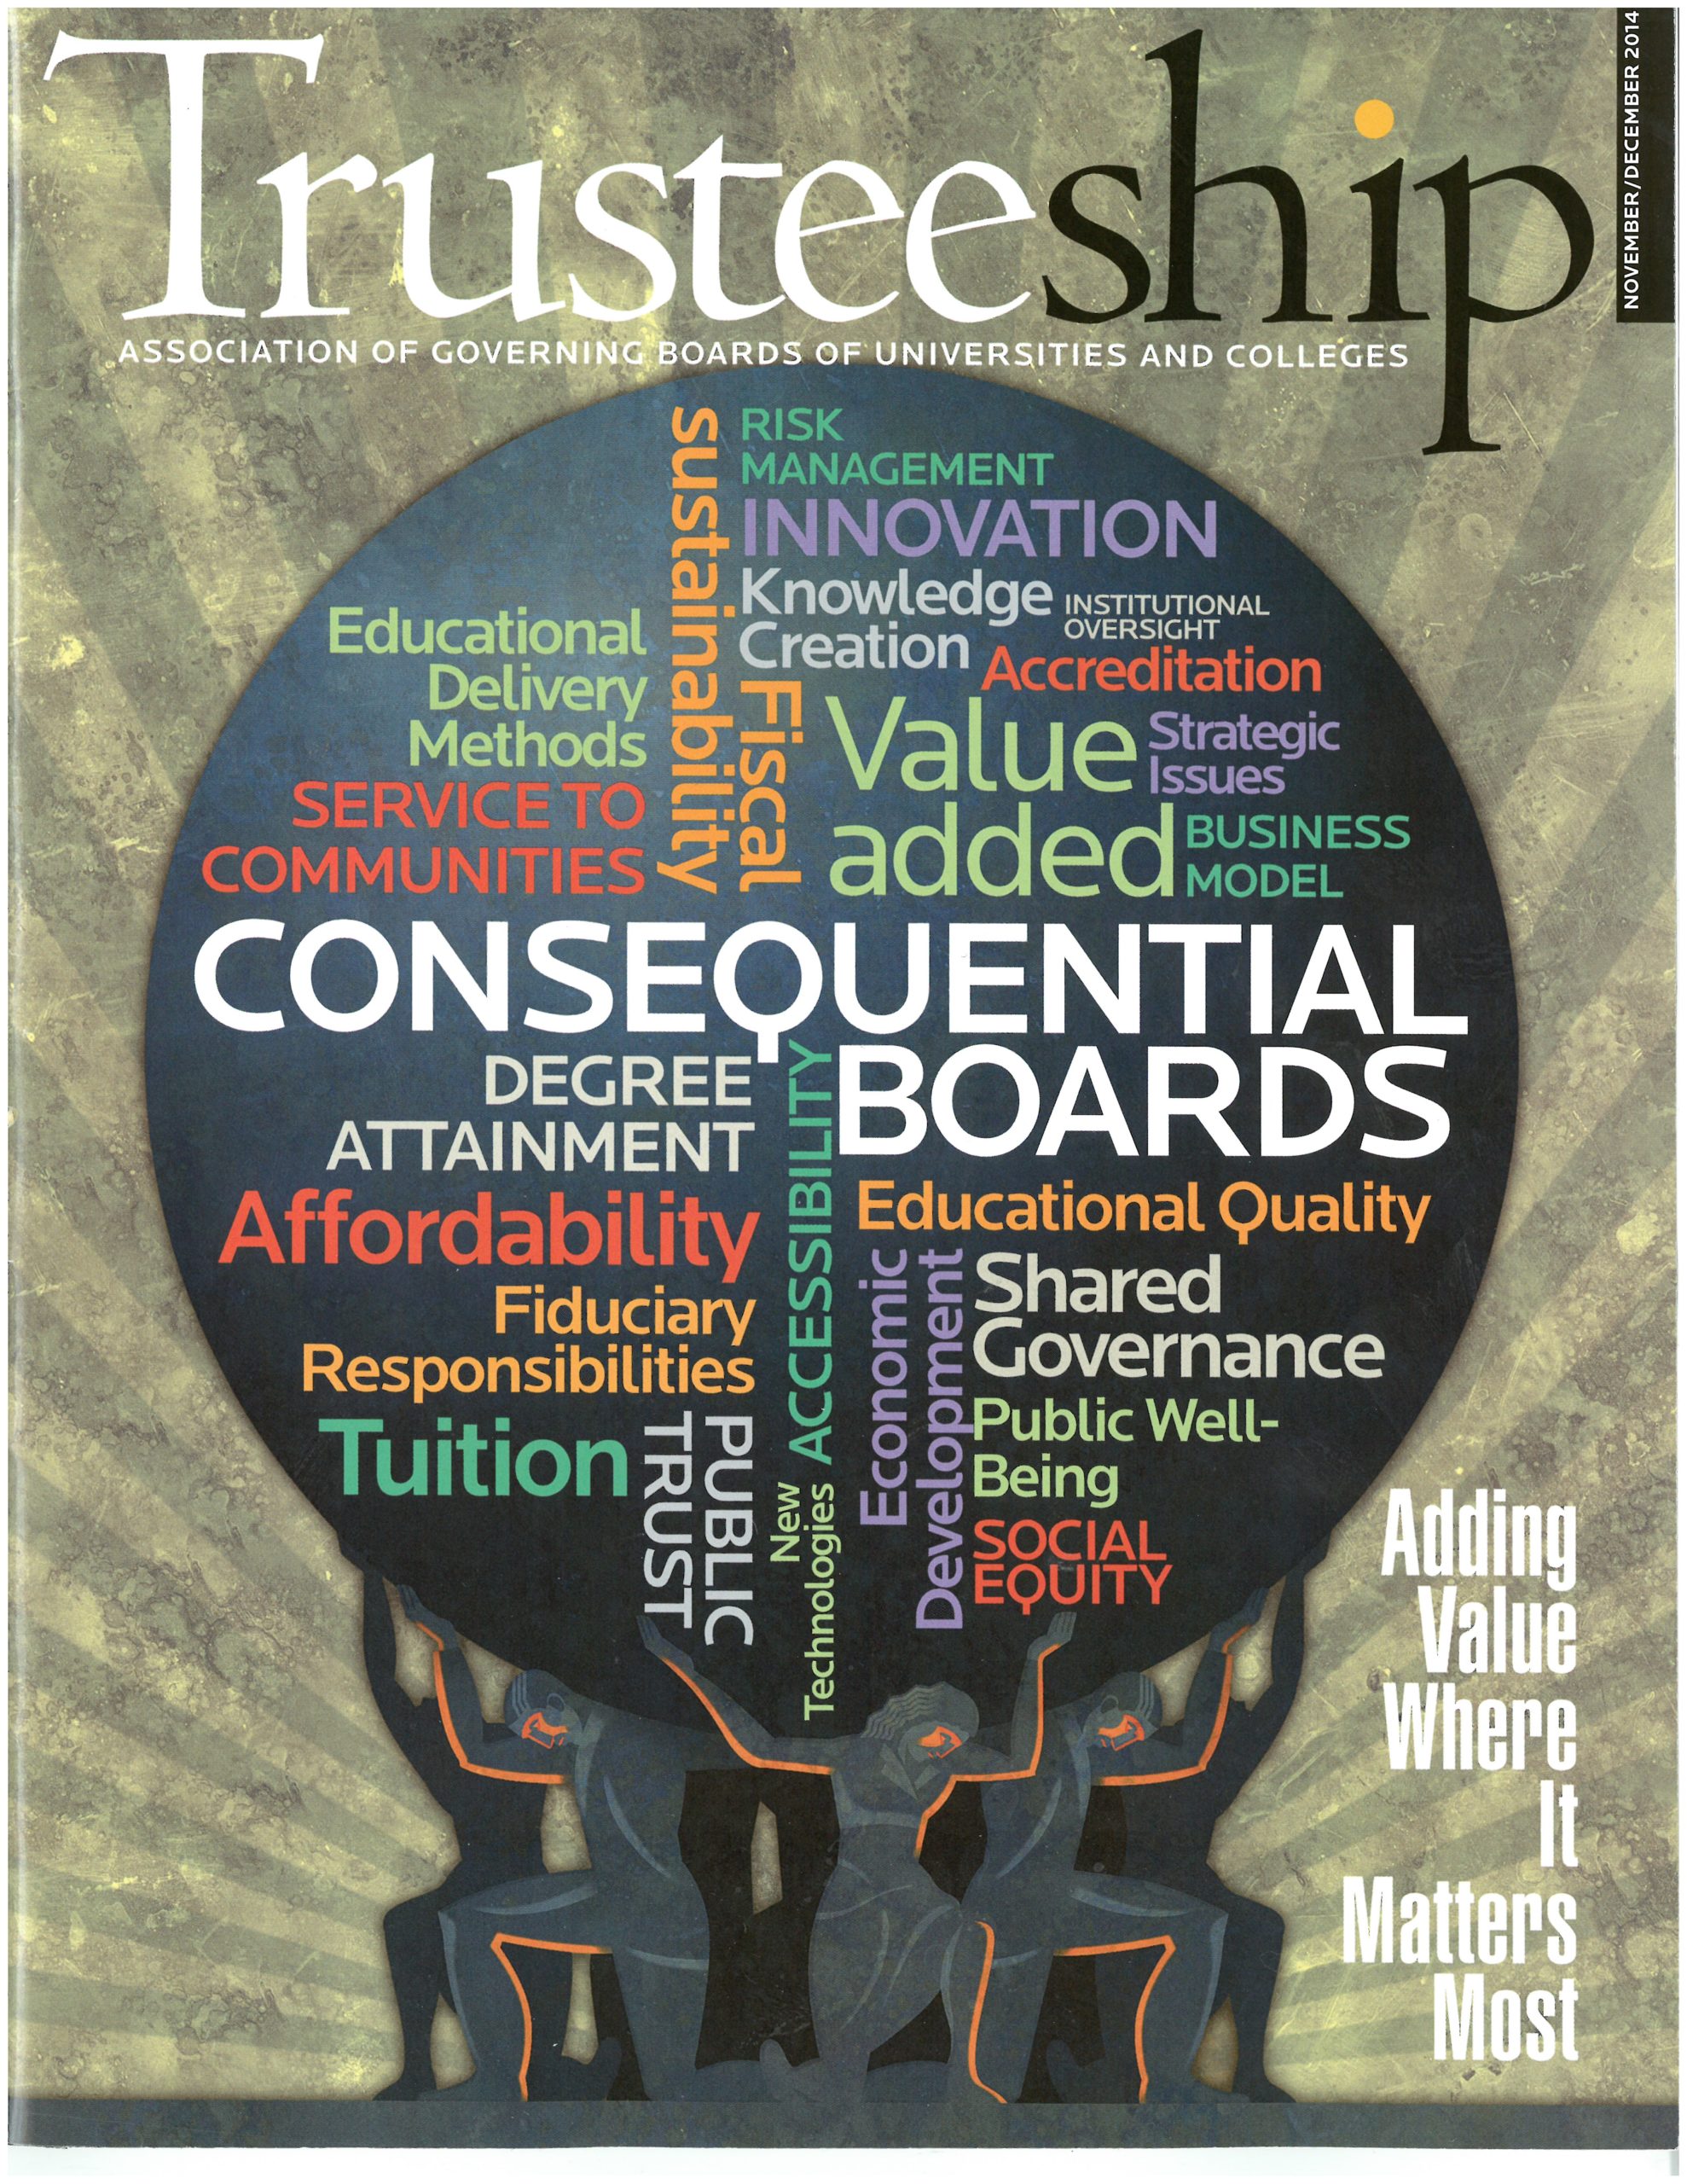 AGB Trusteeship Magazine November/December 2014 with cover article "Consequential Boards"